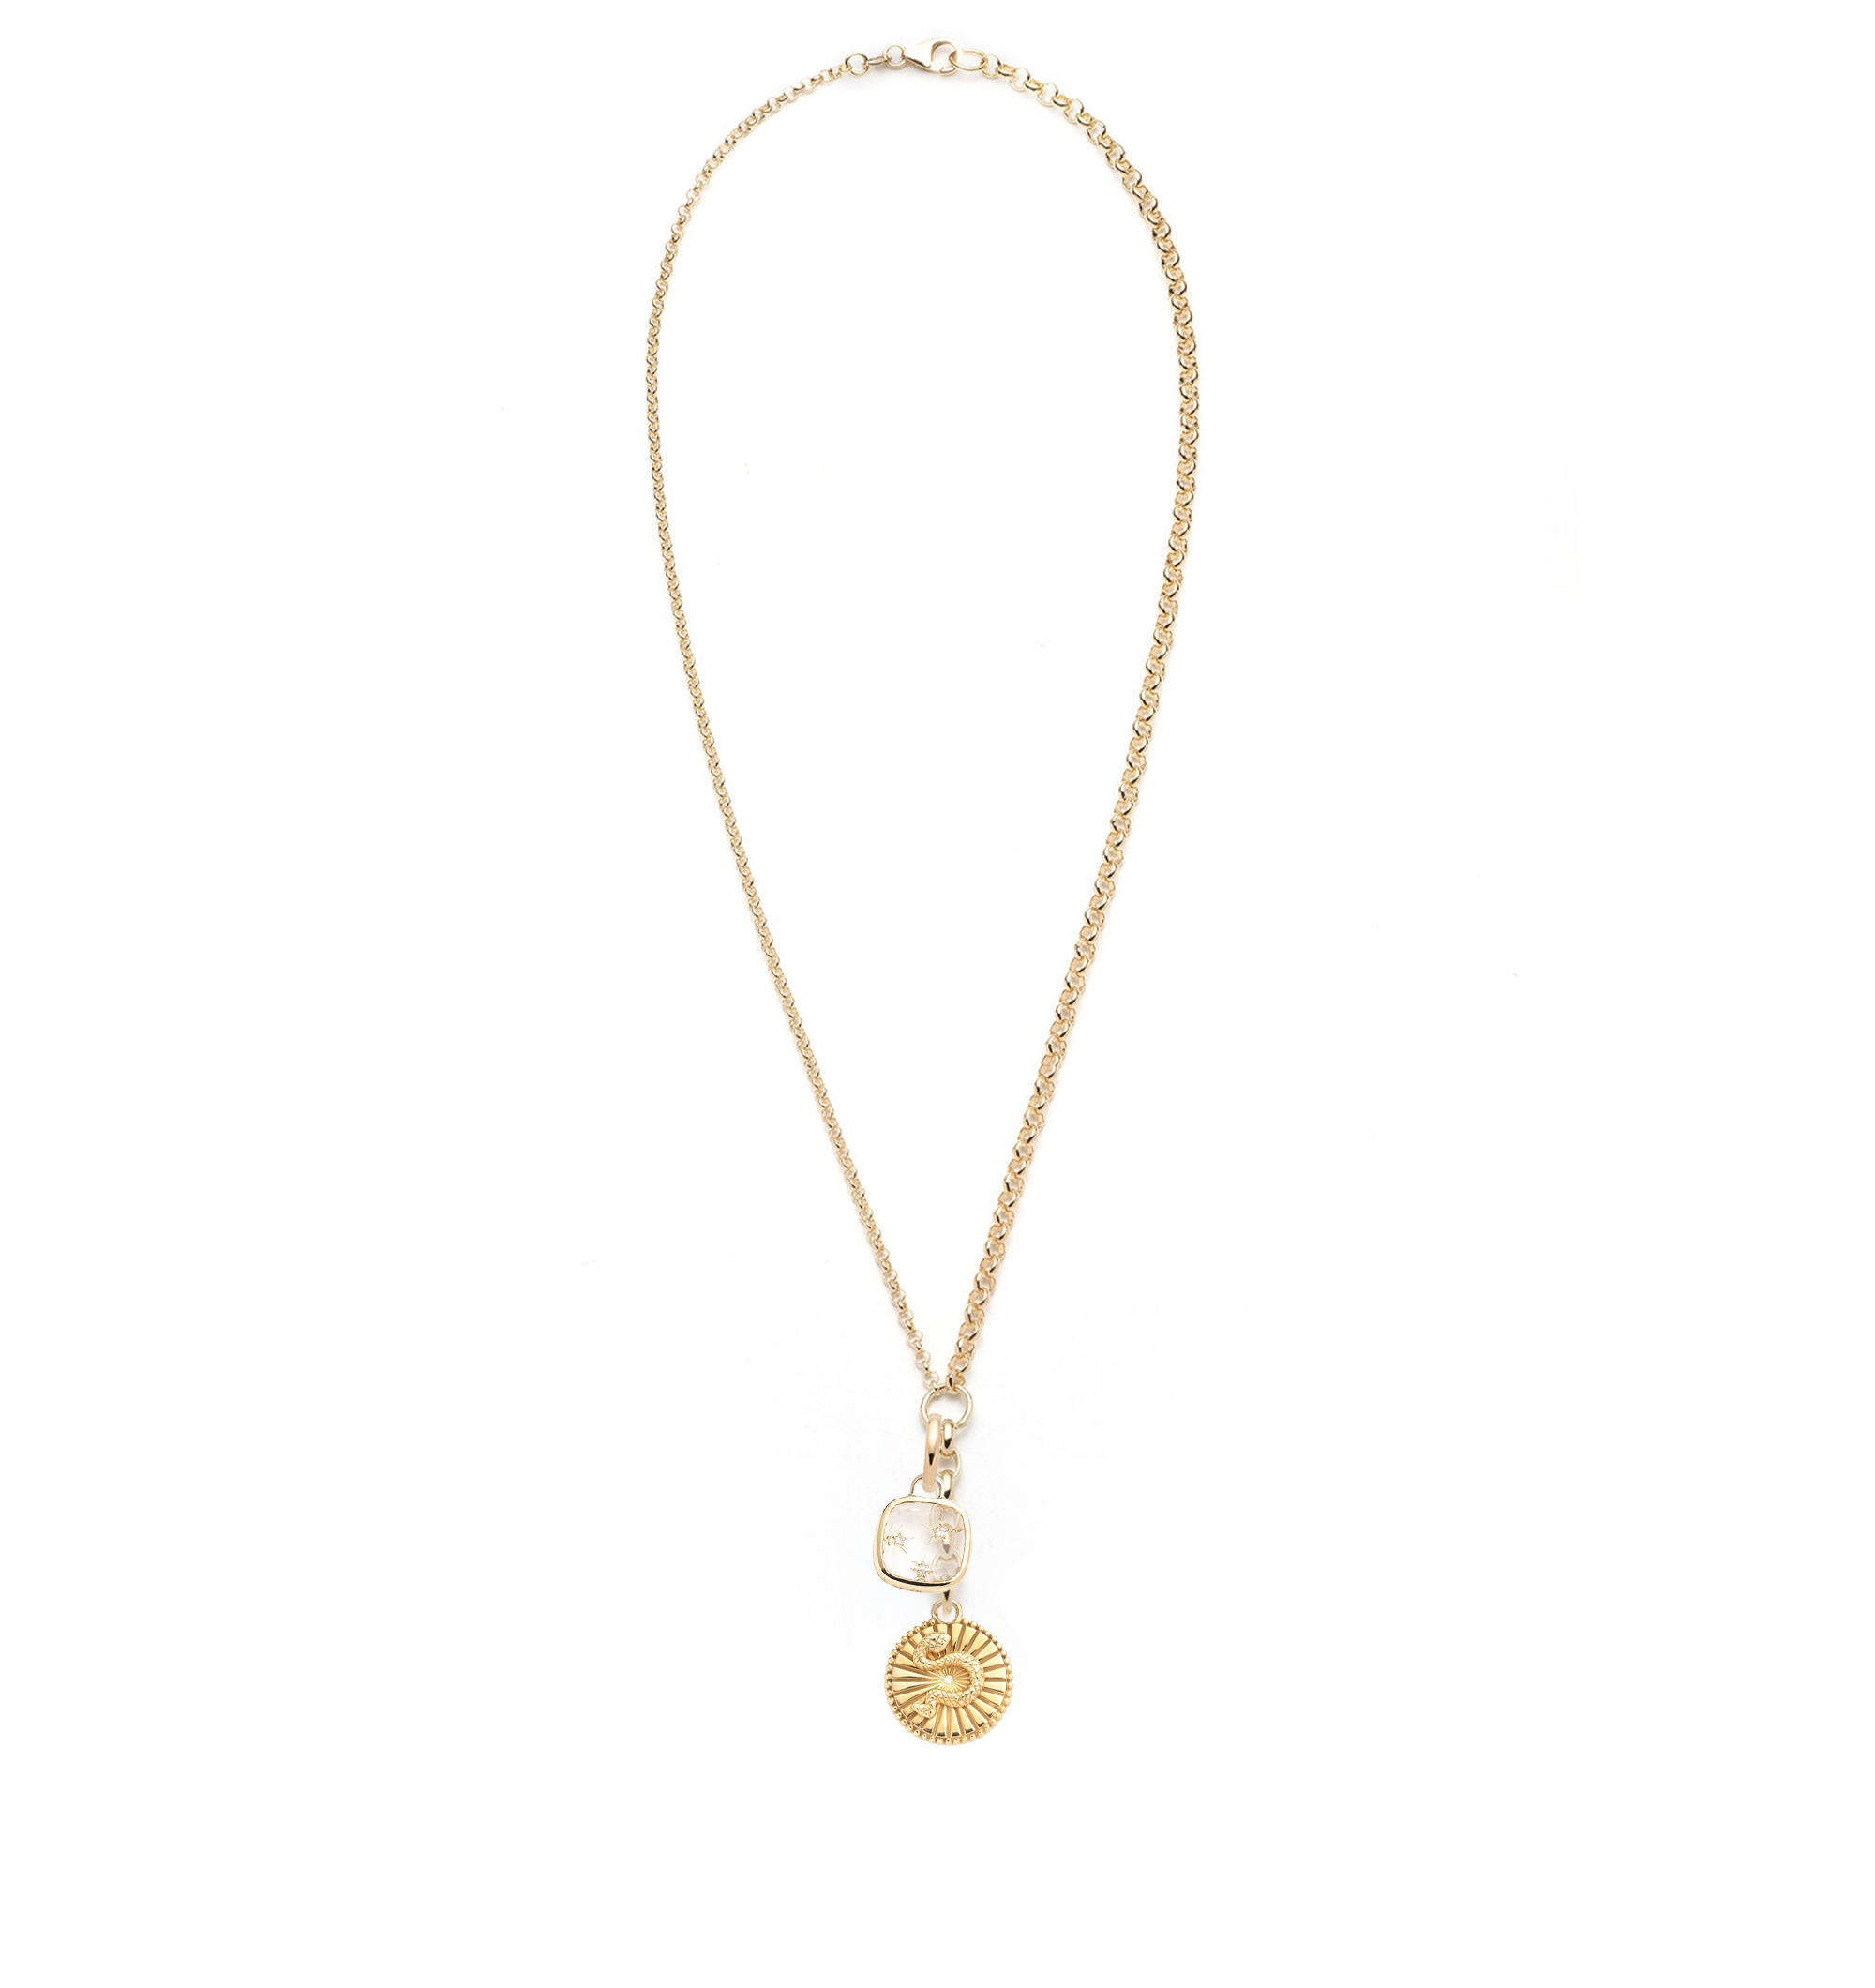 Wholeness & Dream Story : Medium Mixed Belcher Extension Chain Necklace